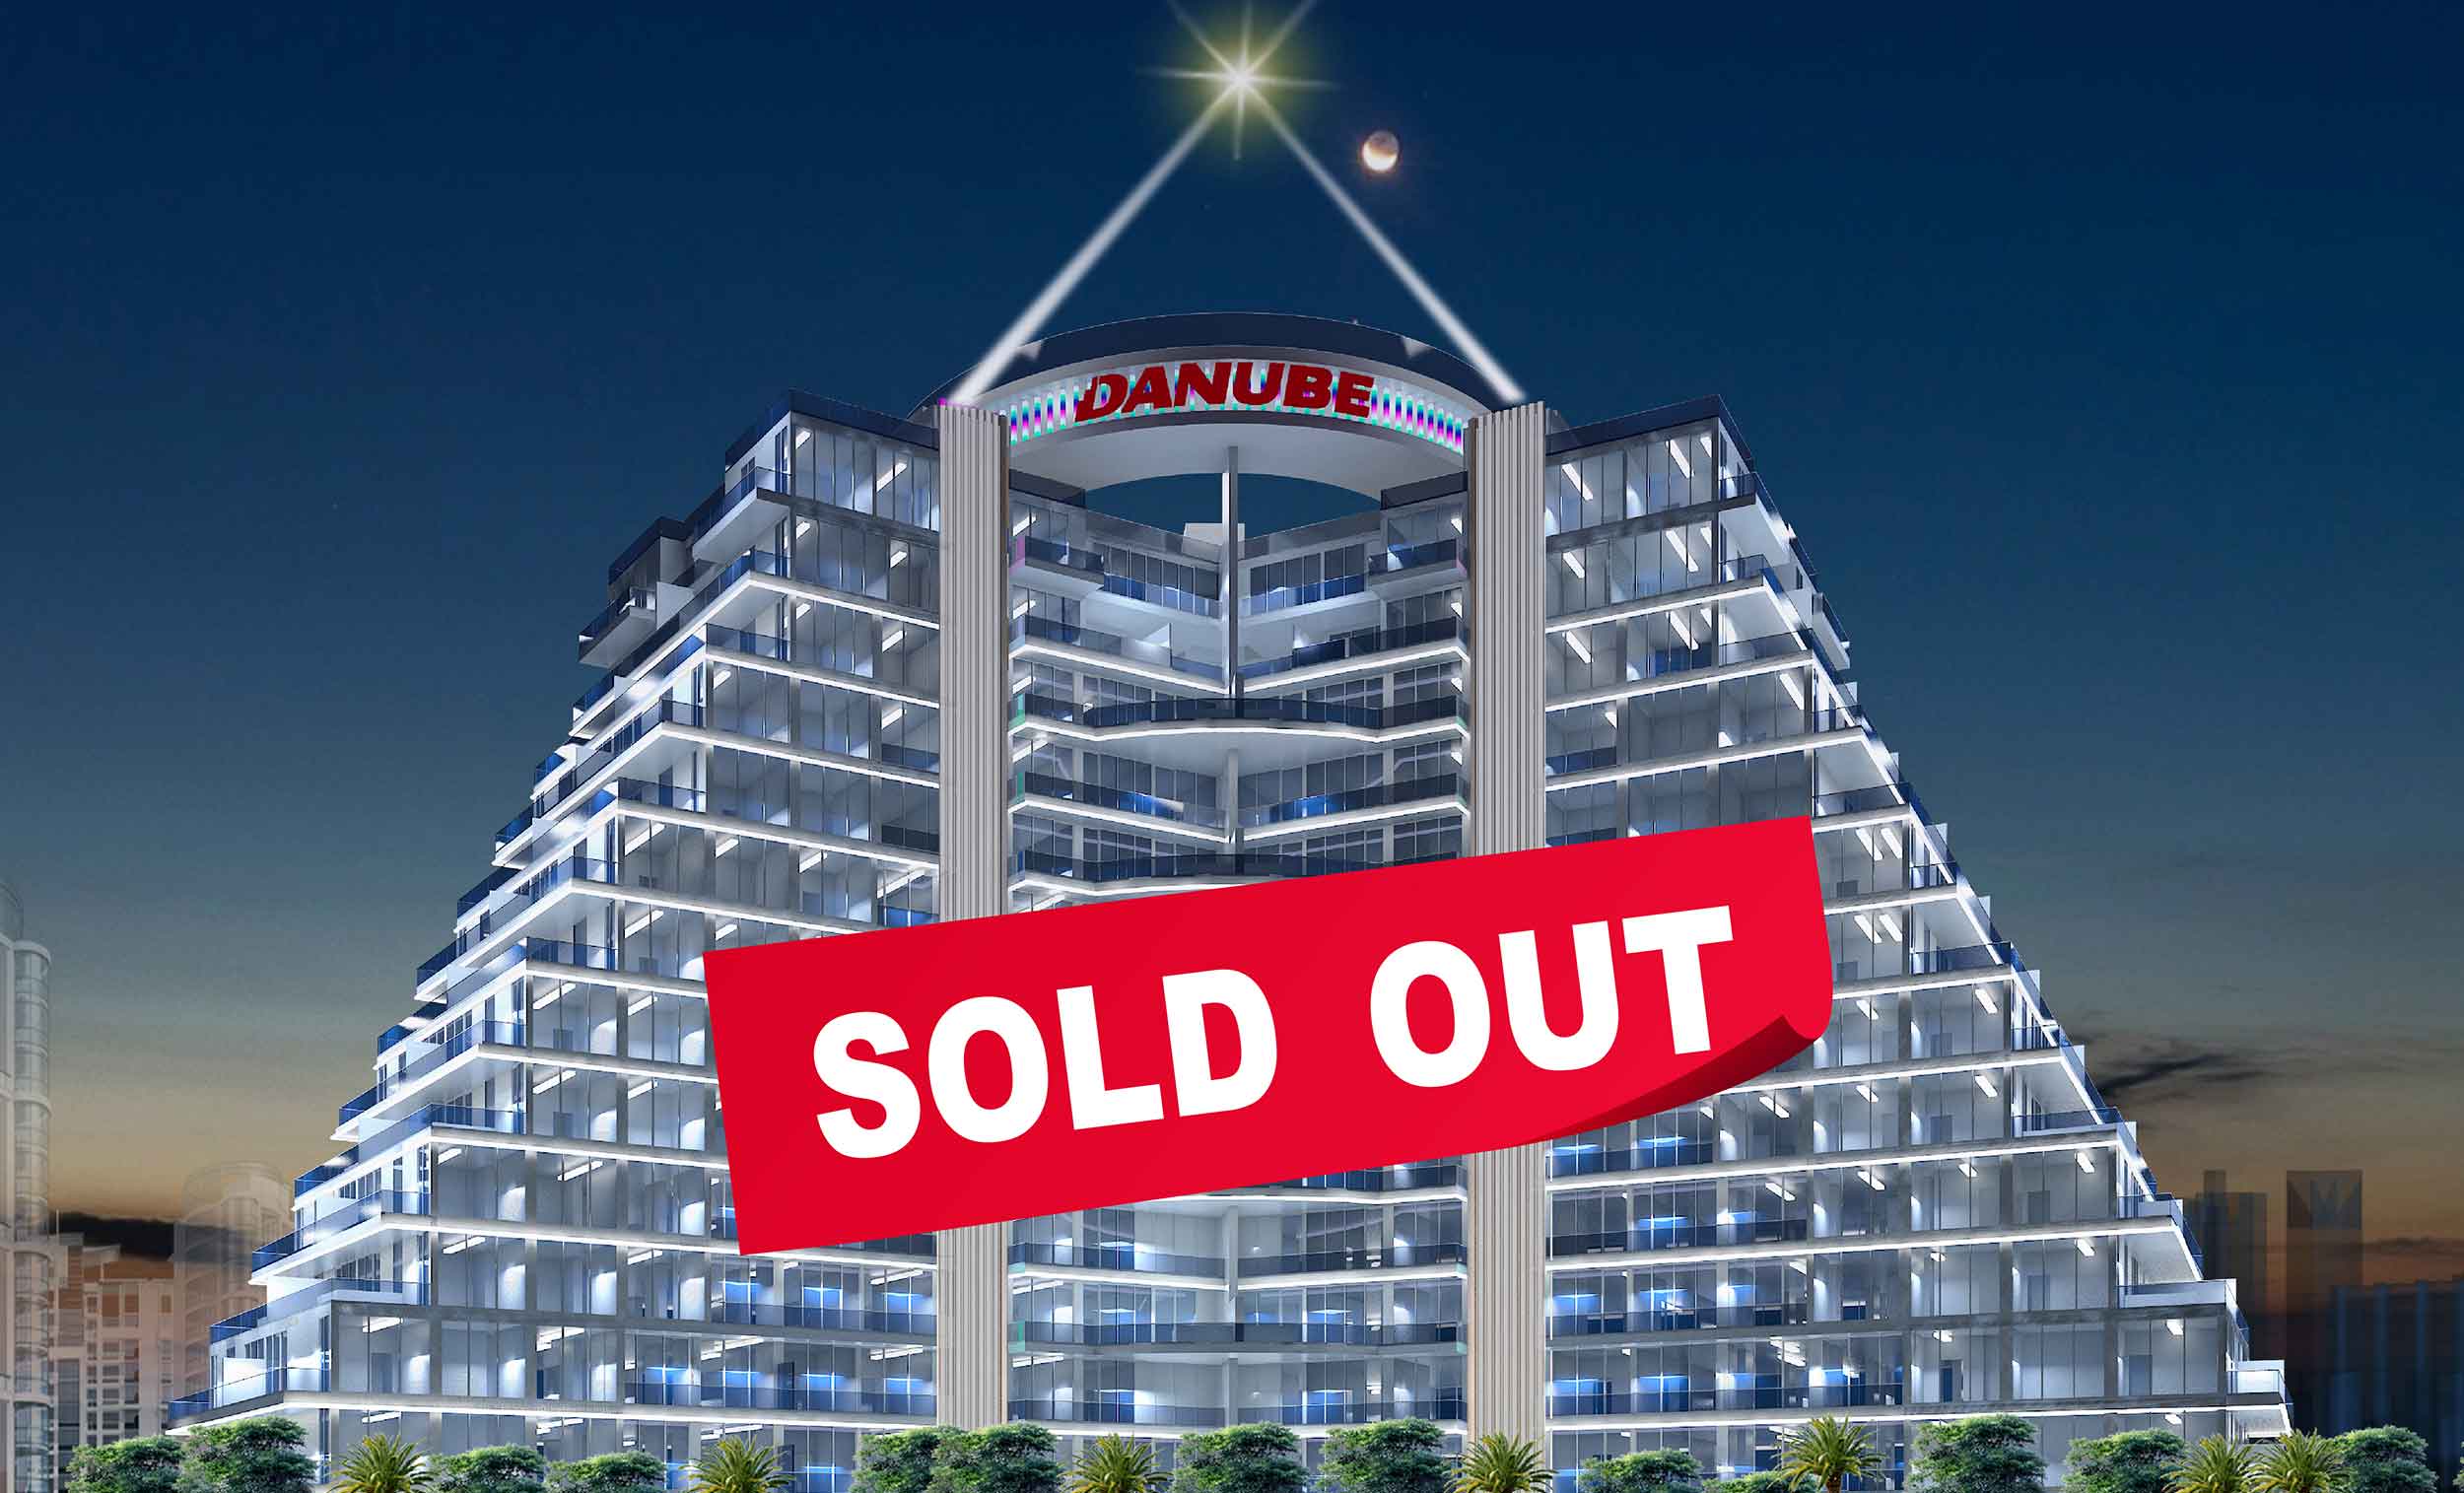 Dubai: Danube Properties’ Gemz project sold out within hours of launch